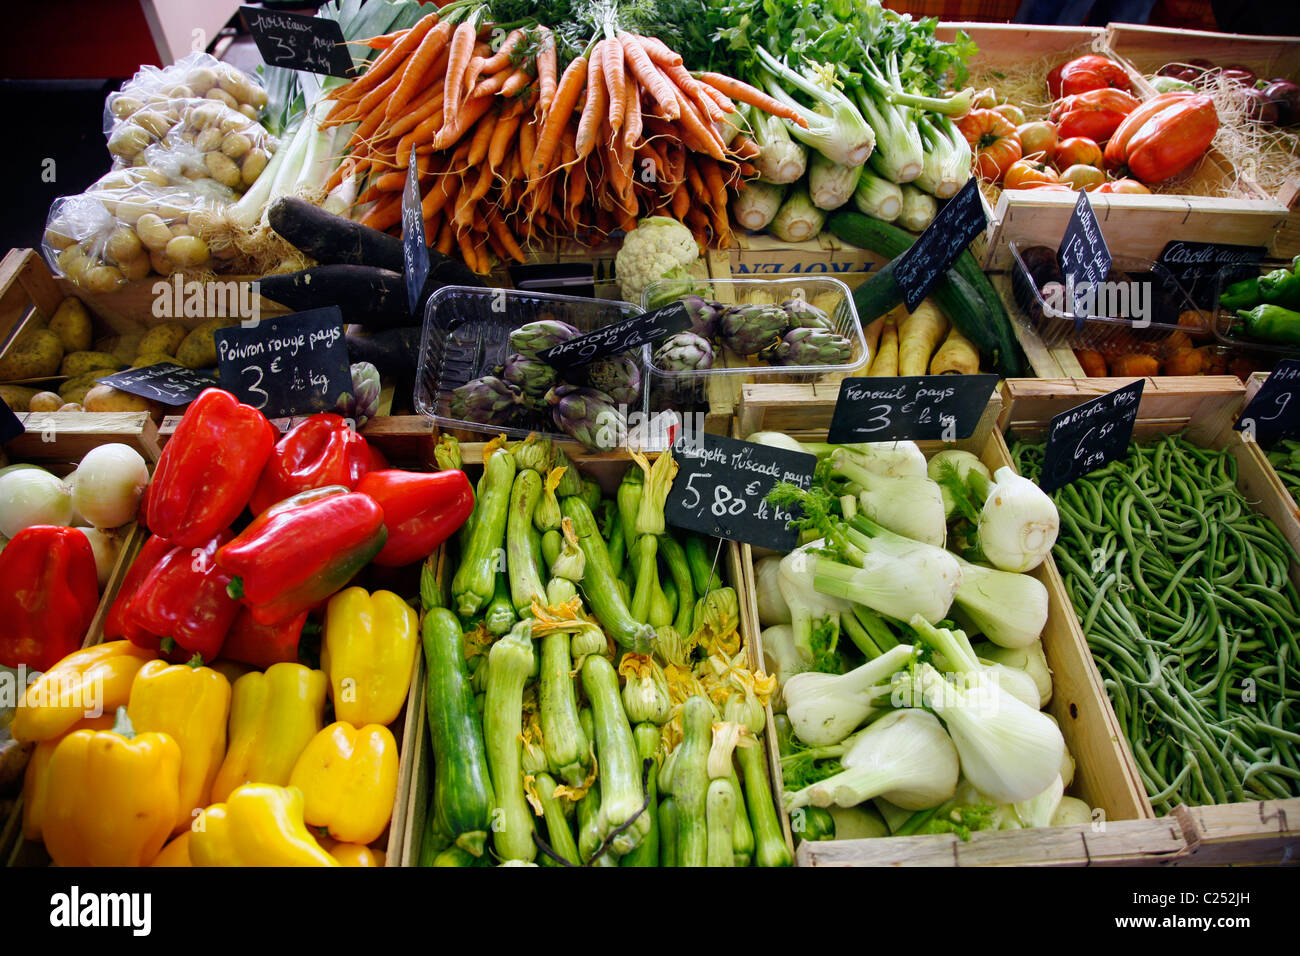 Vegetables stall at the Cours Massena market in the old town, Antibes, Alpes Maritimes, Provence, France. Stock Photo